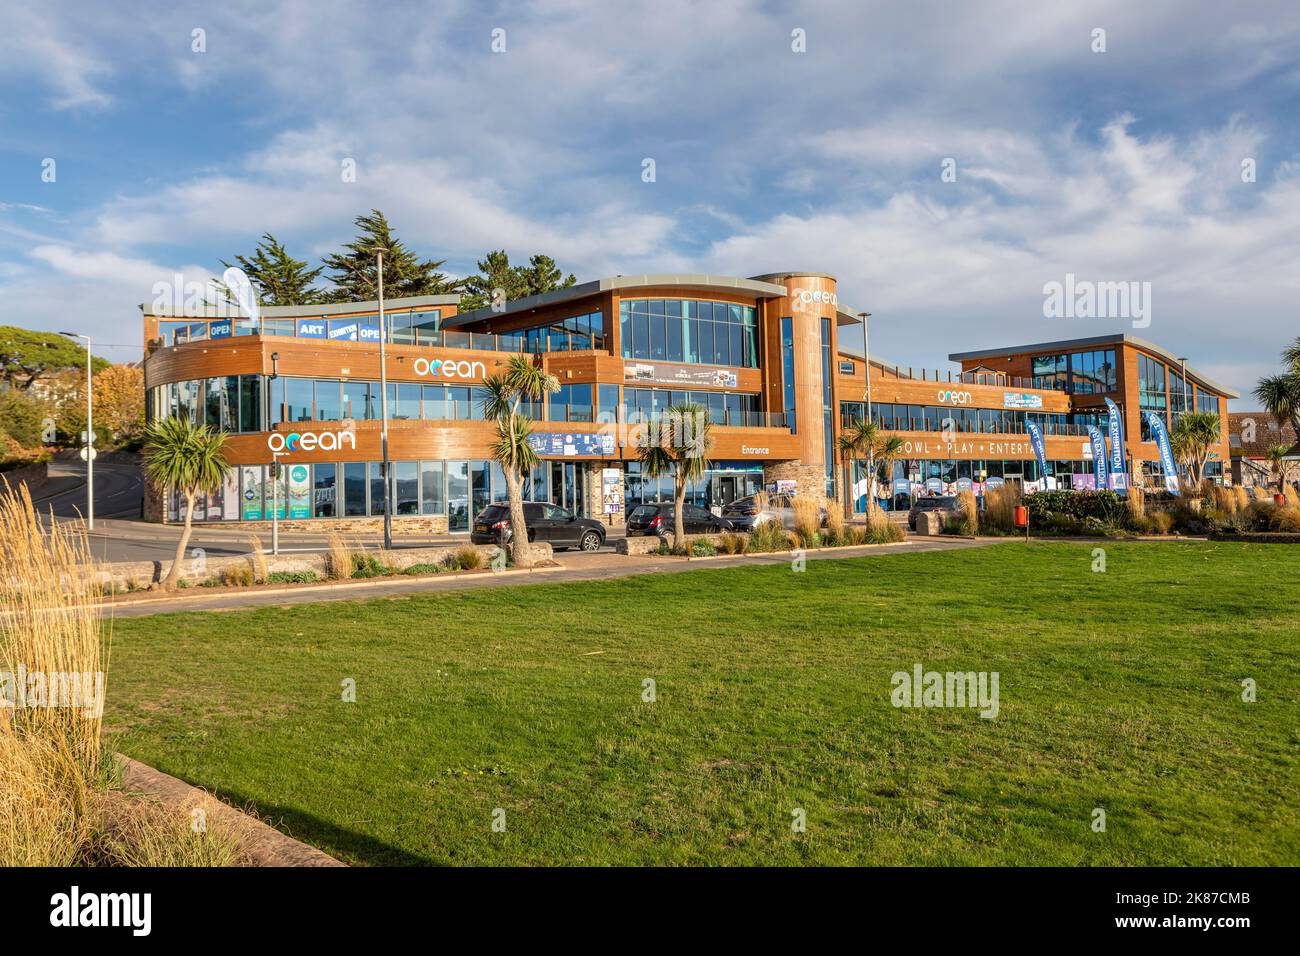 The Ocean entertainment centre on Exmouth seafront Stock Photo